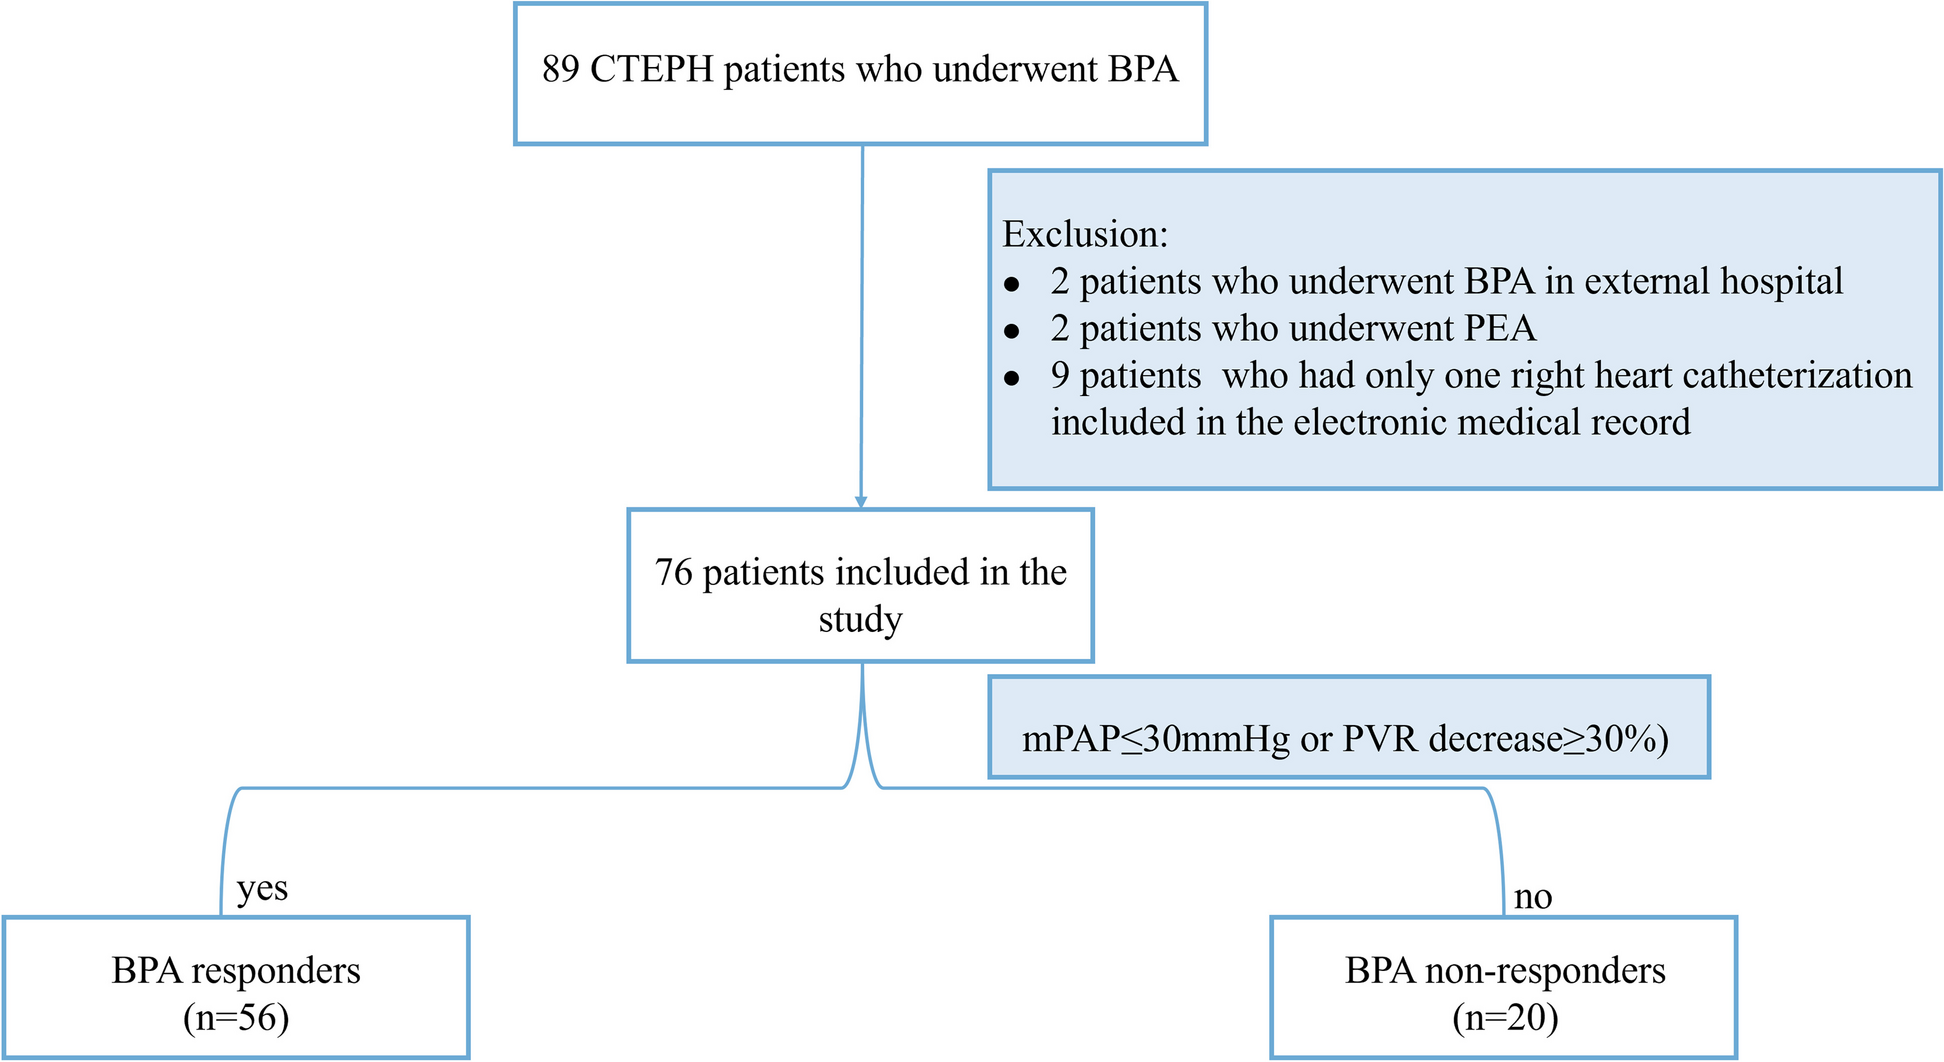 Effects of right ventricular remodeling in chronic thromboembolic pulmonary hypertension on the outcomes of balloon pulmonary angioplasty: a 2D-speckle tracking echocardiography study